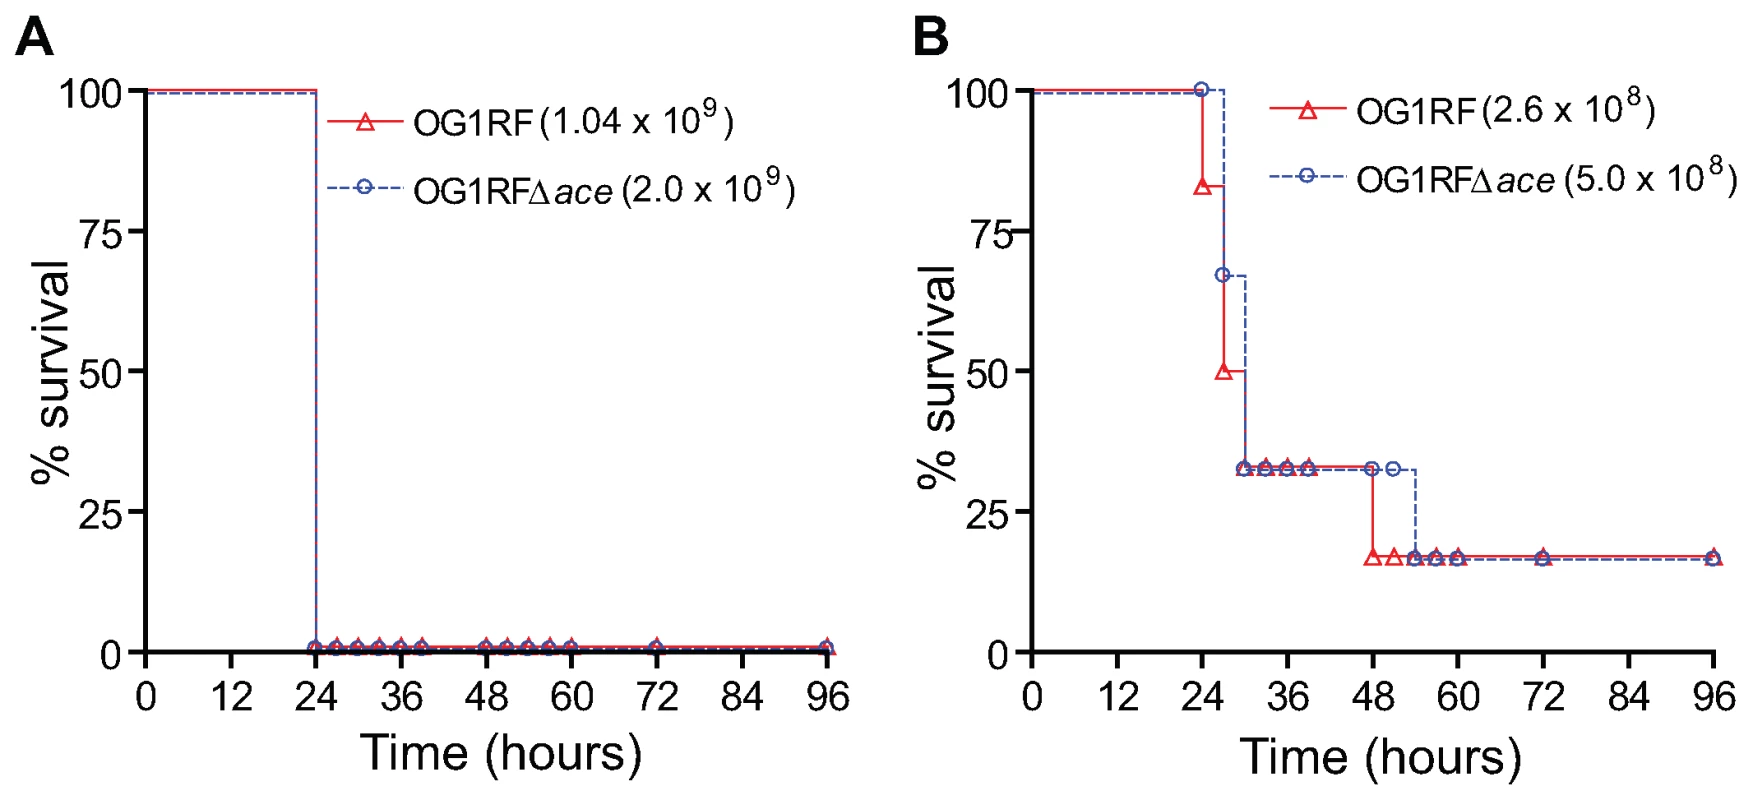 Kaplan-Meier survival plots of wild-type OG1RF and the <i>ace</i> mutant in the mouse peritonitis model.